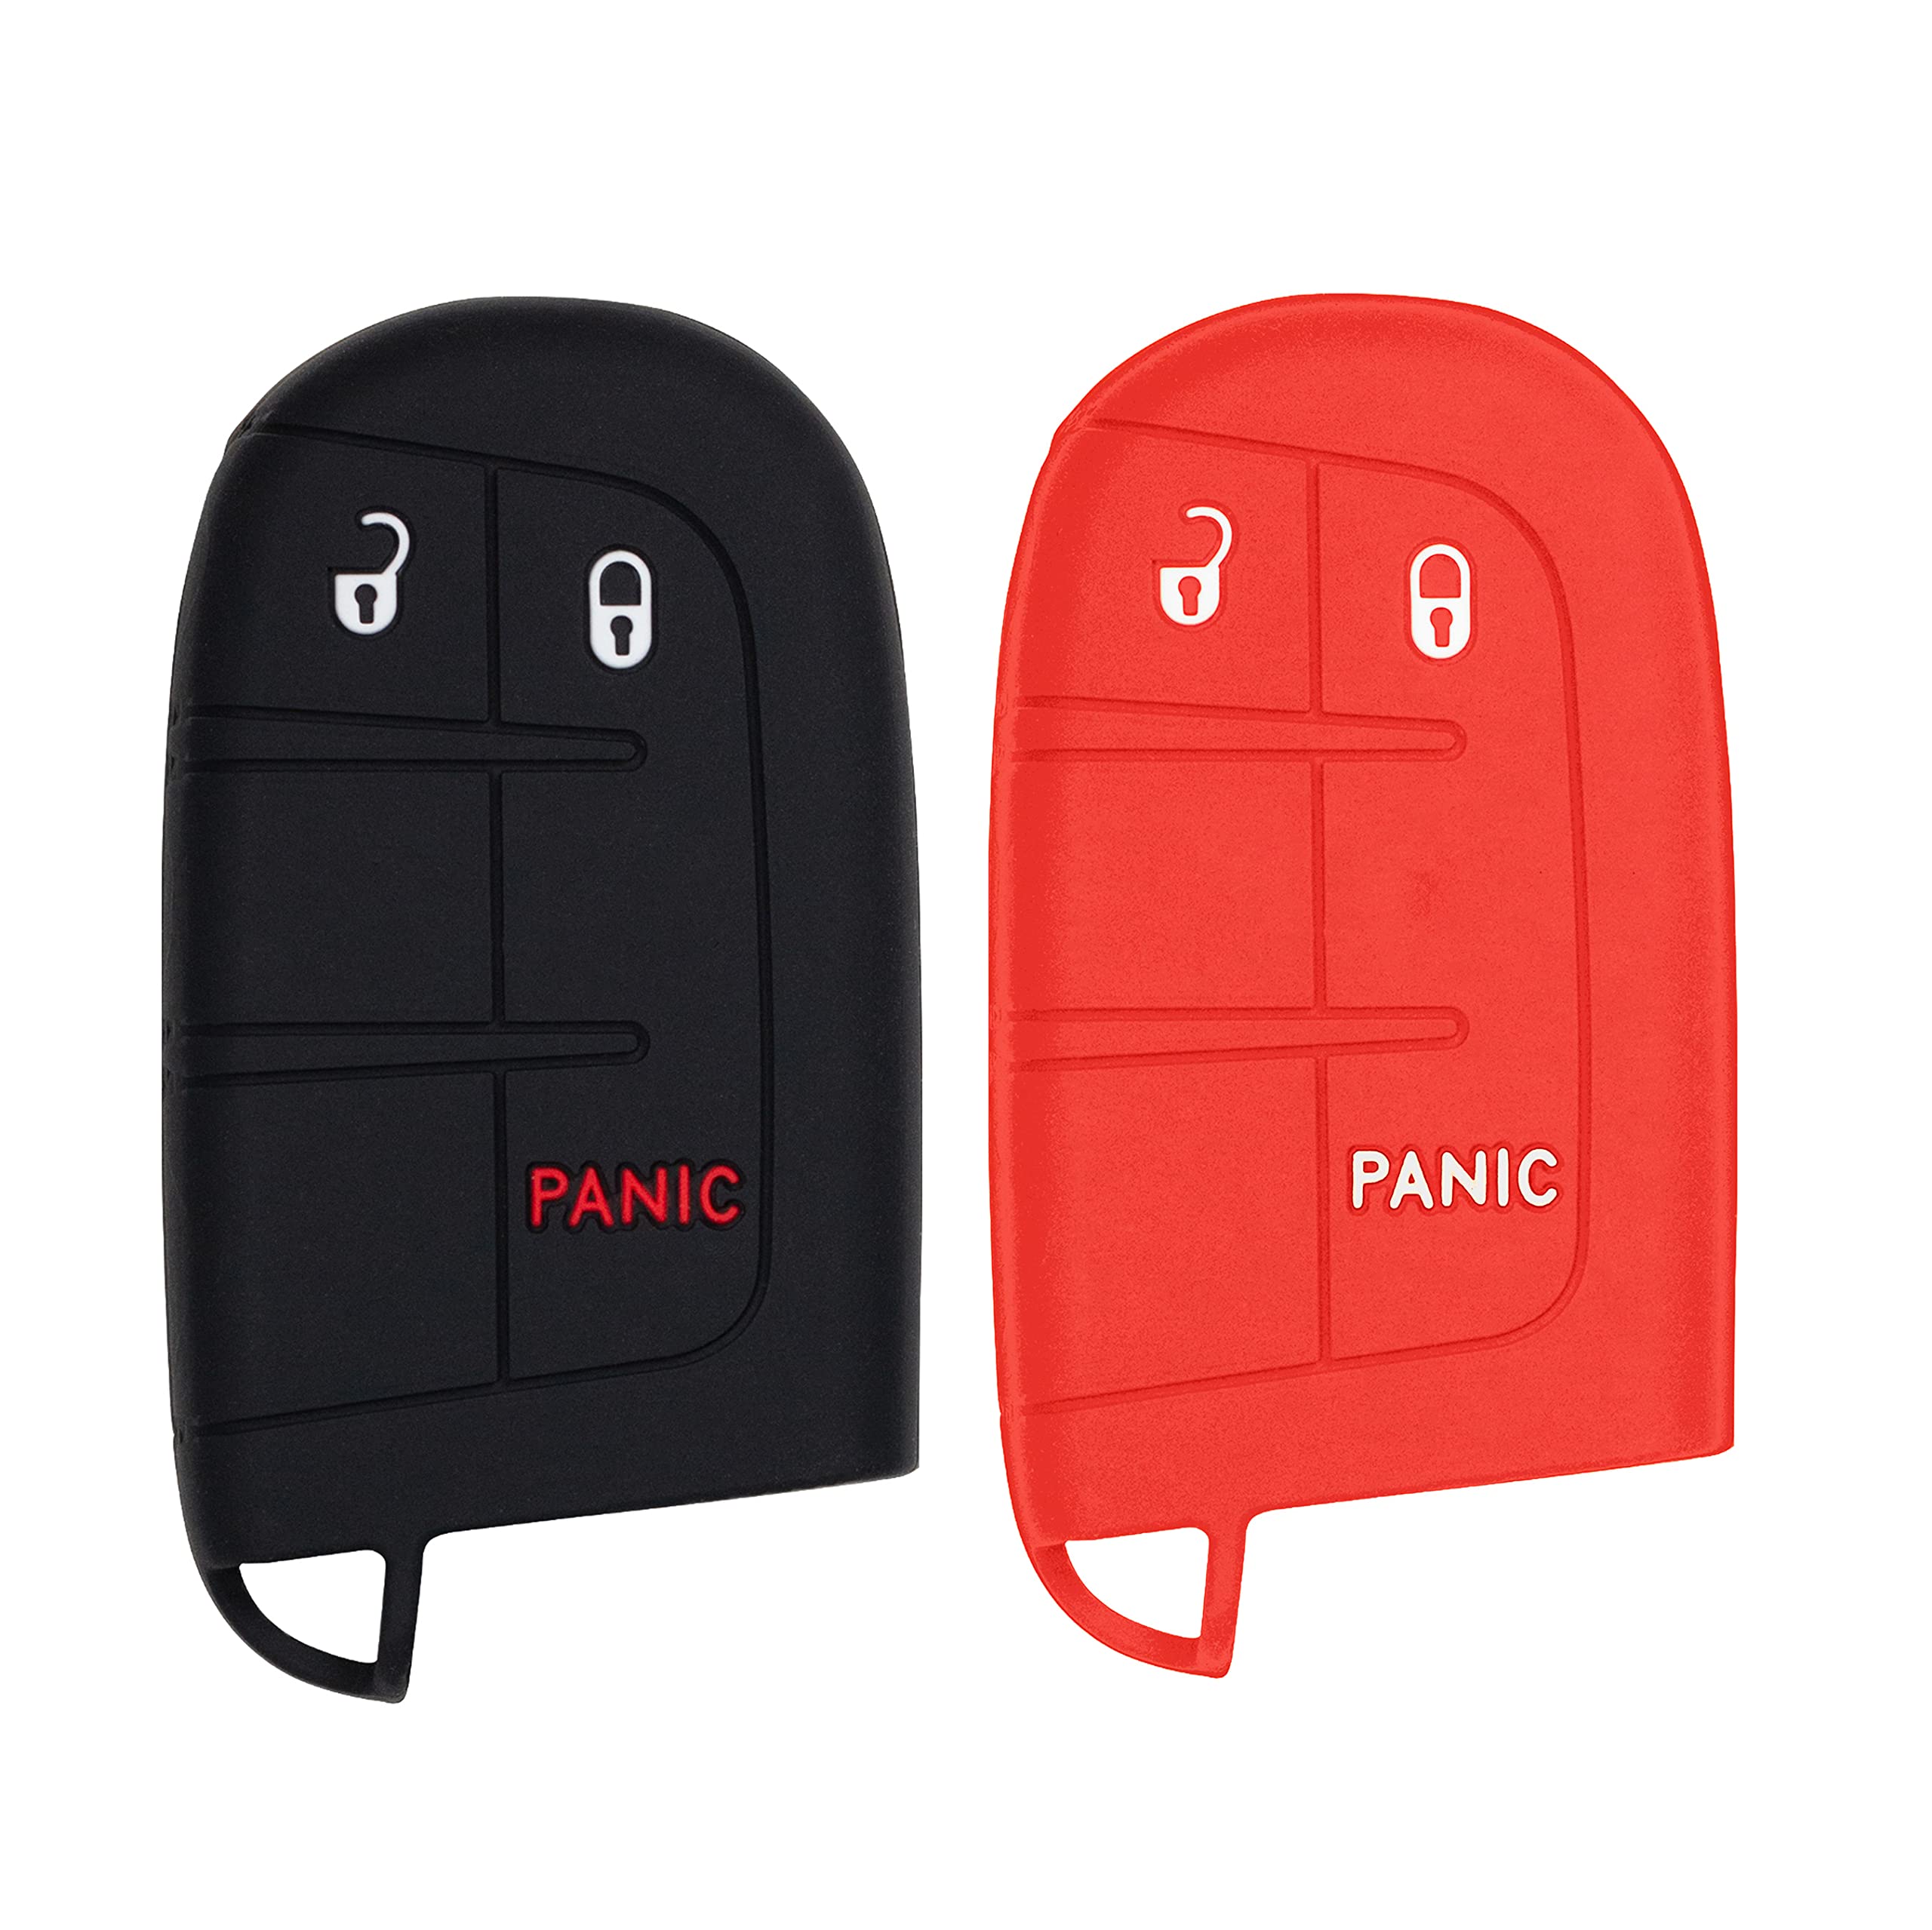 Silicone Case for Keyless Entry Smart Key fob for Jeep Renegade Grand Cherokee Compass Journey Dart Charger Durango M3N-40821302 (Double, Black & Red)